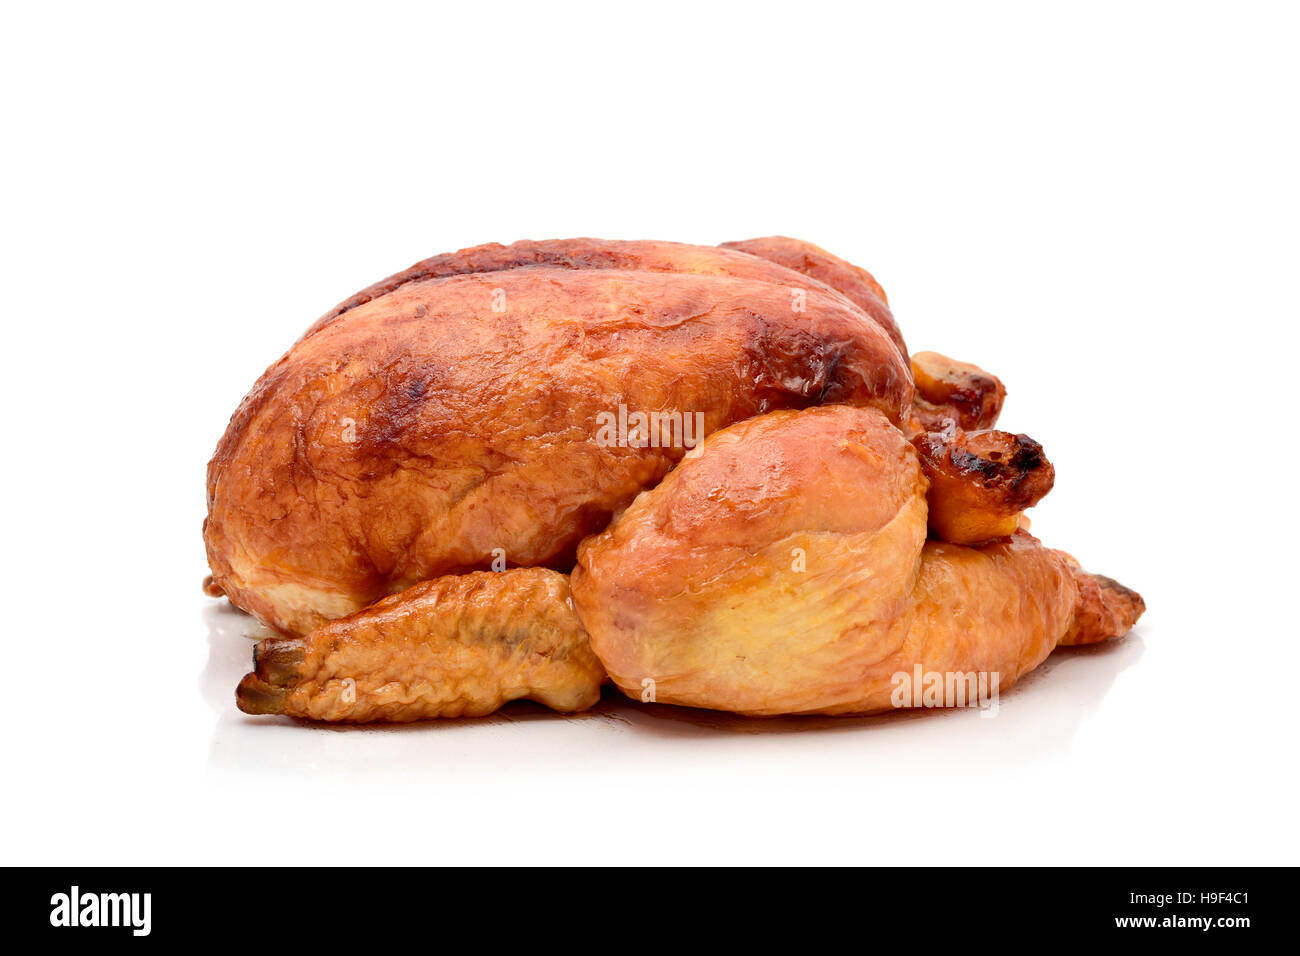 a roast turkey or a roast chicken on a white background Stock Photo